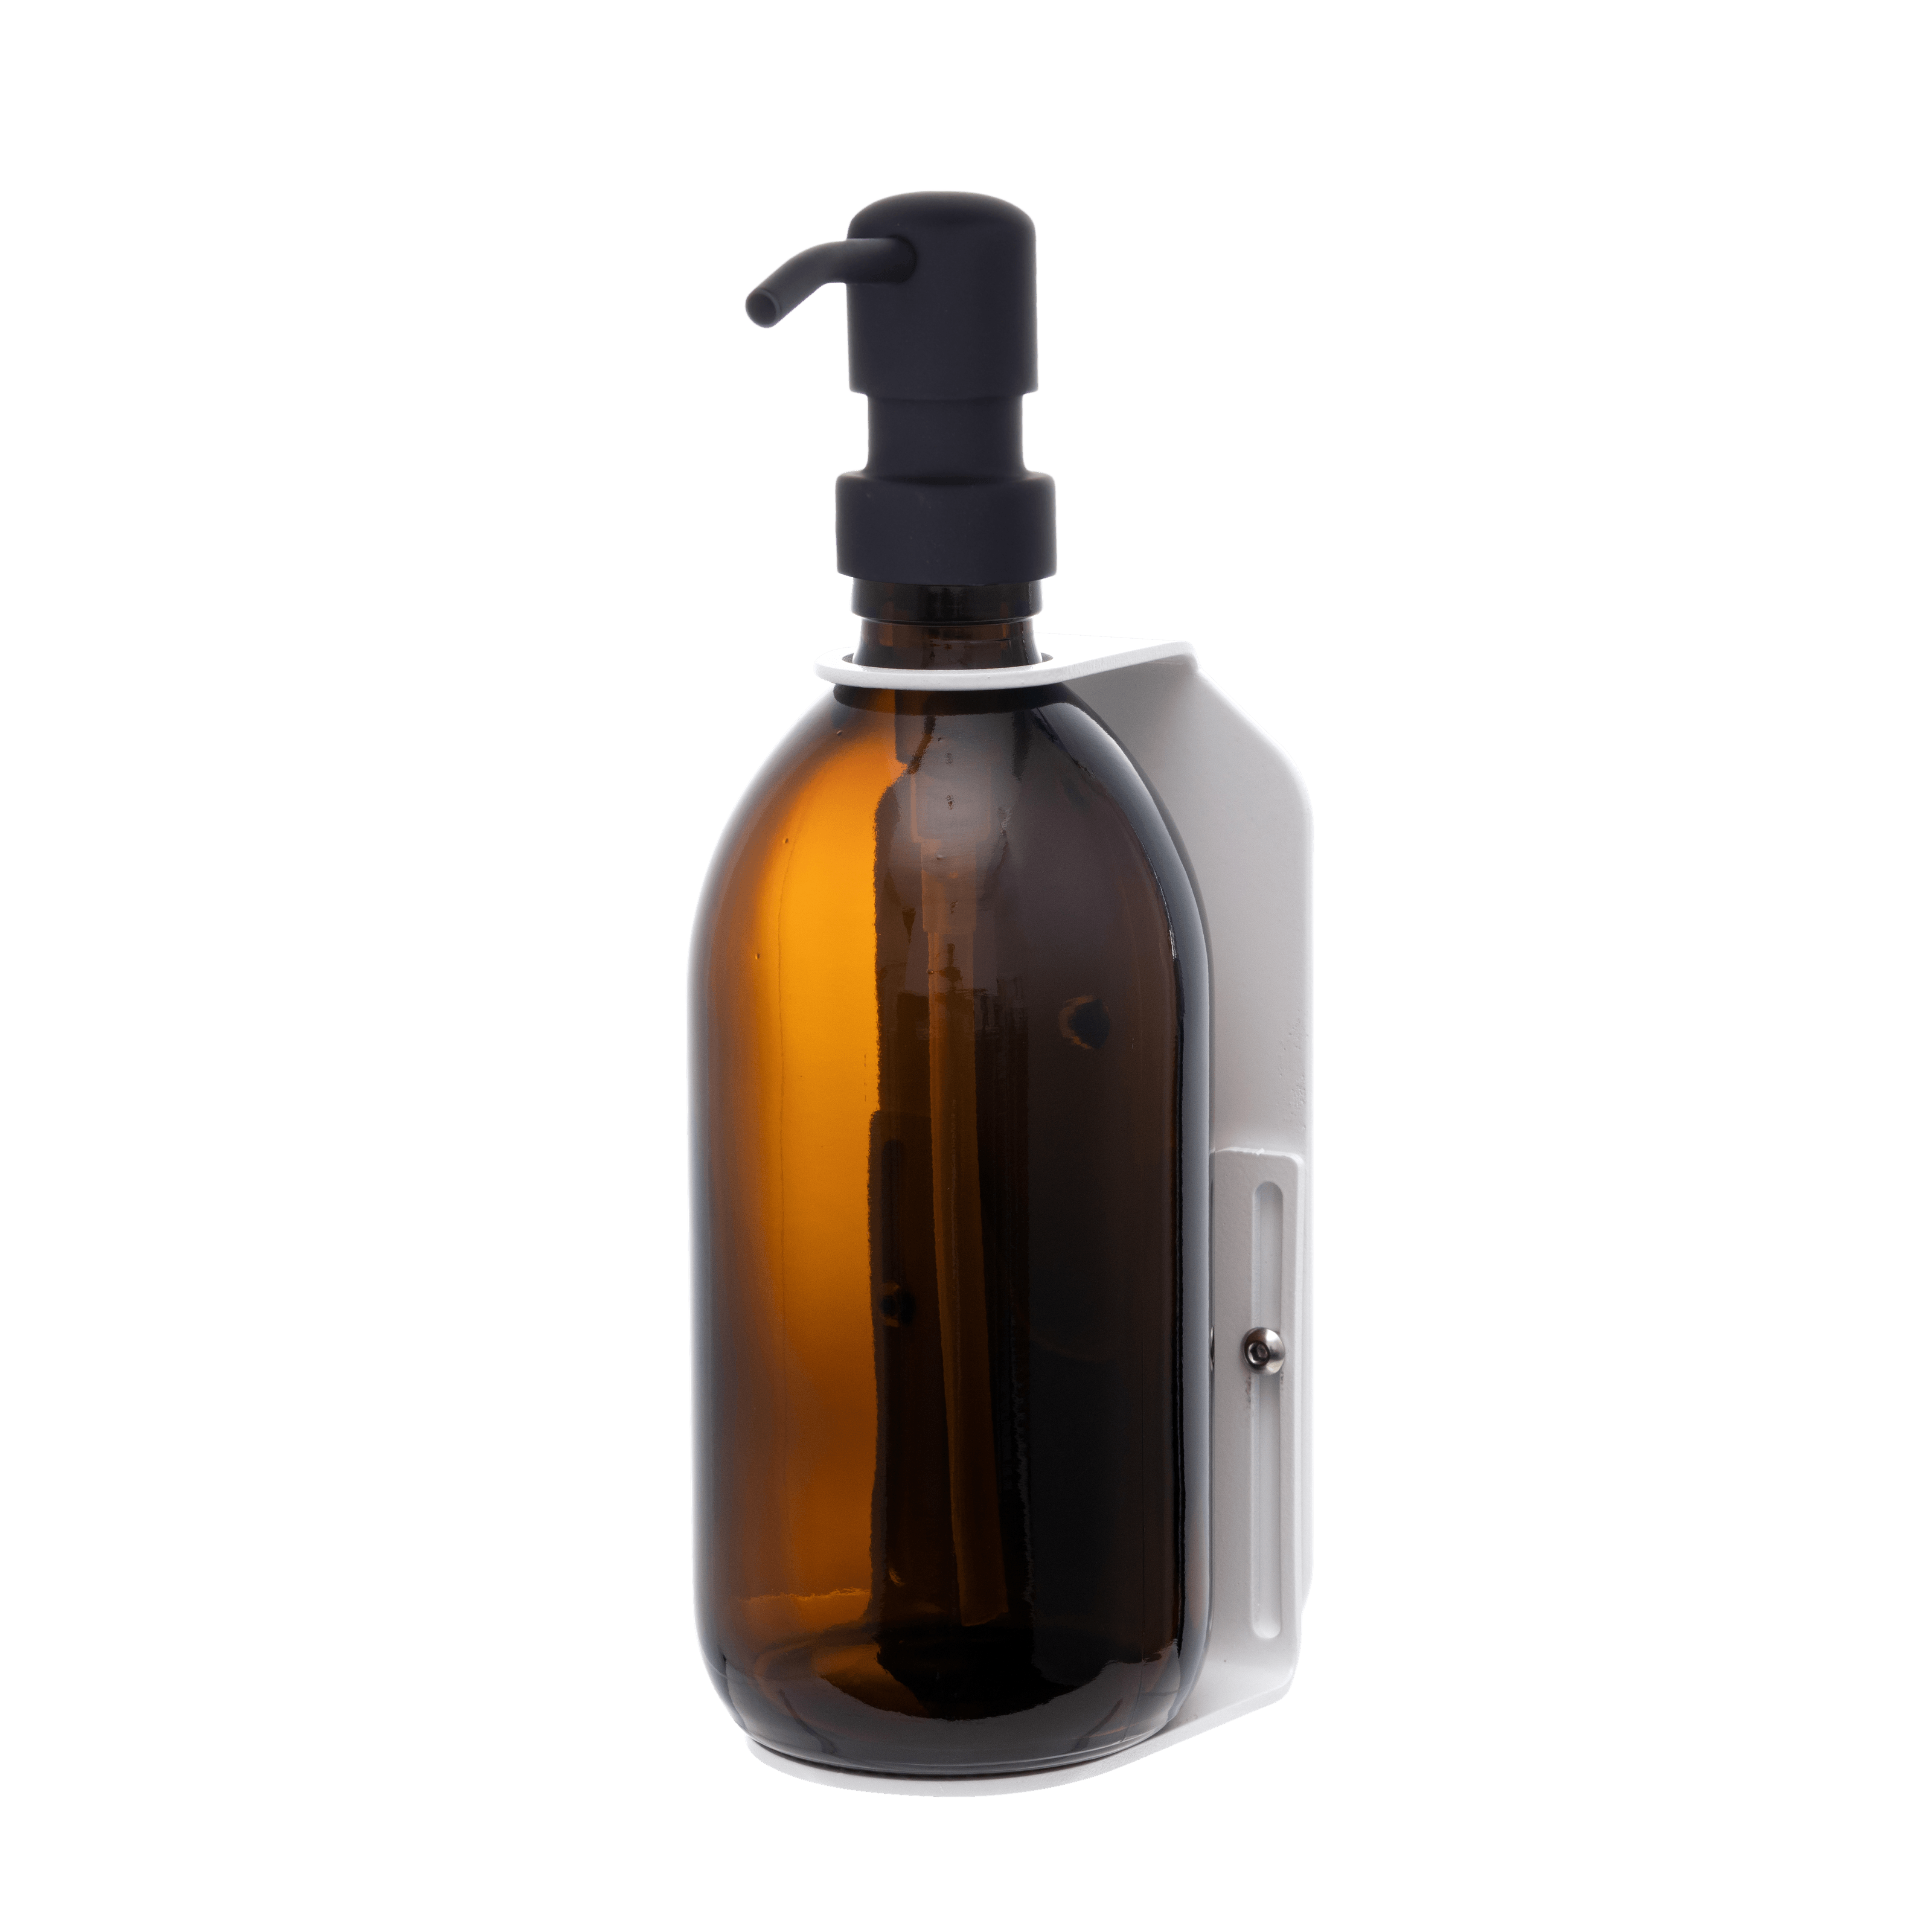 White Single Wall mounted Holder with 500ml Amber Bottles and Black Pump